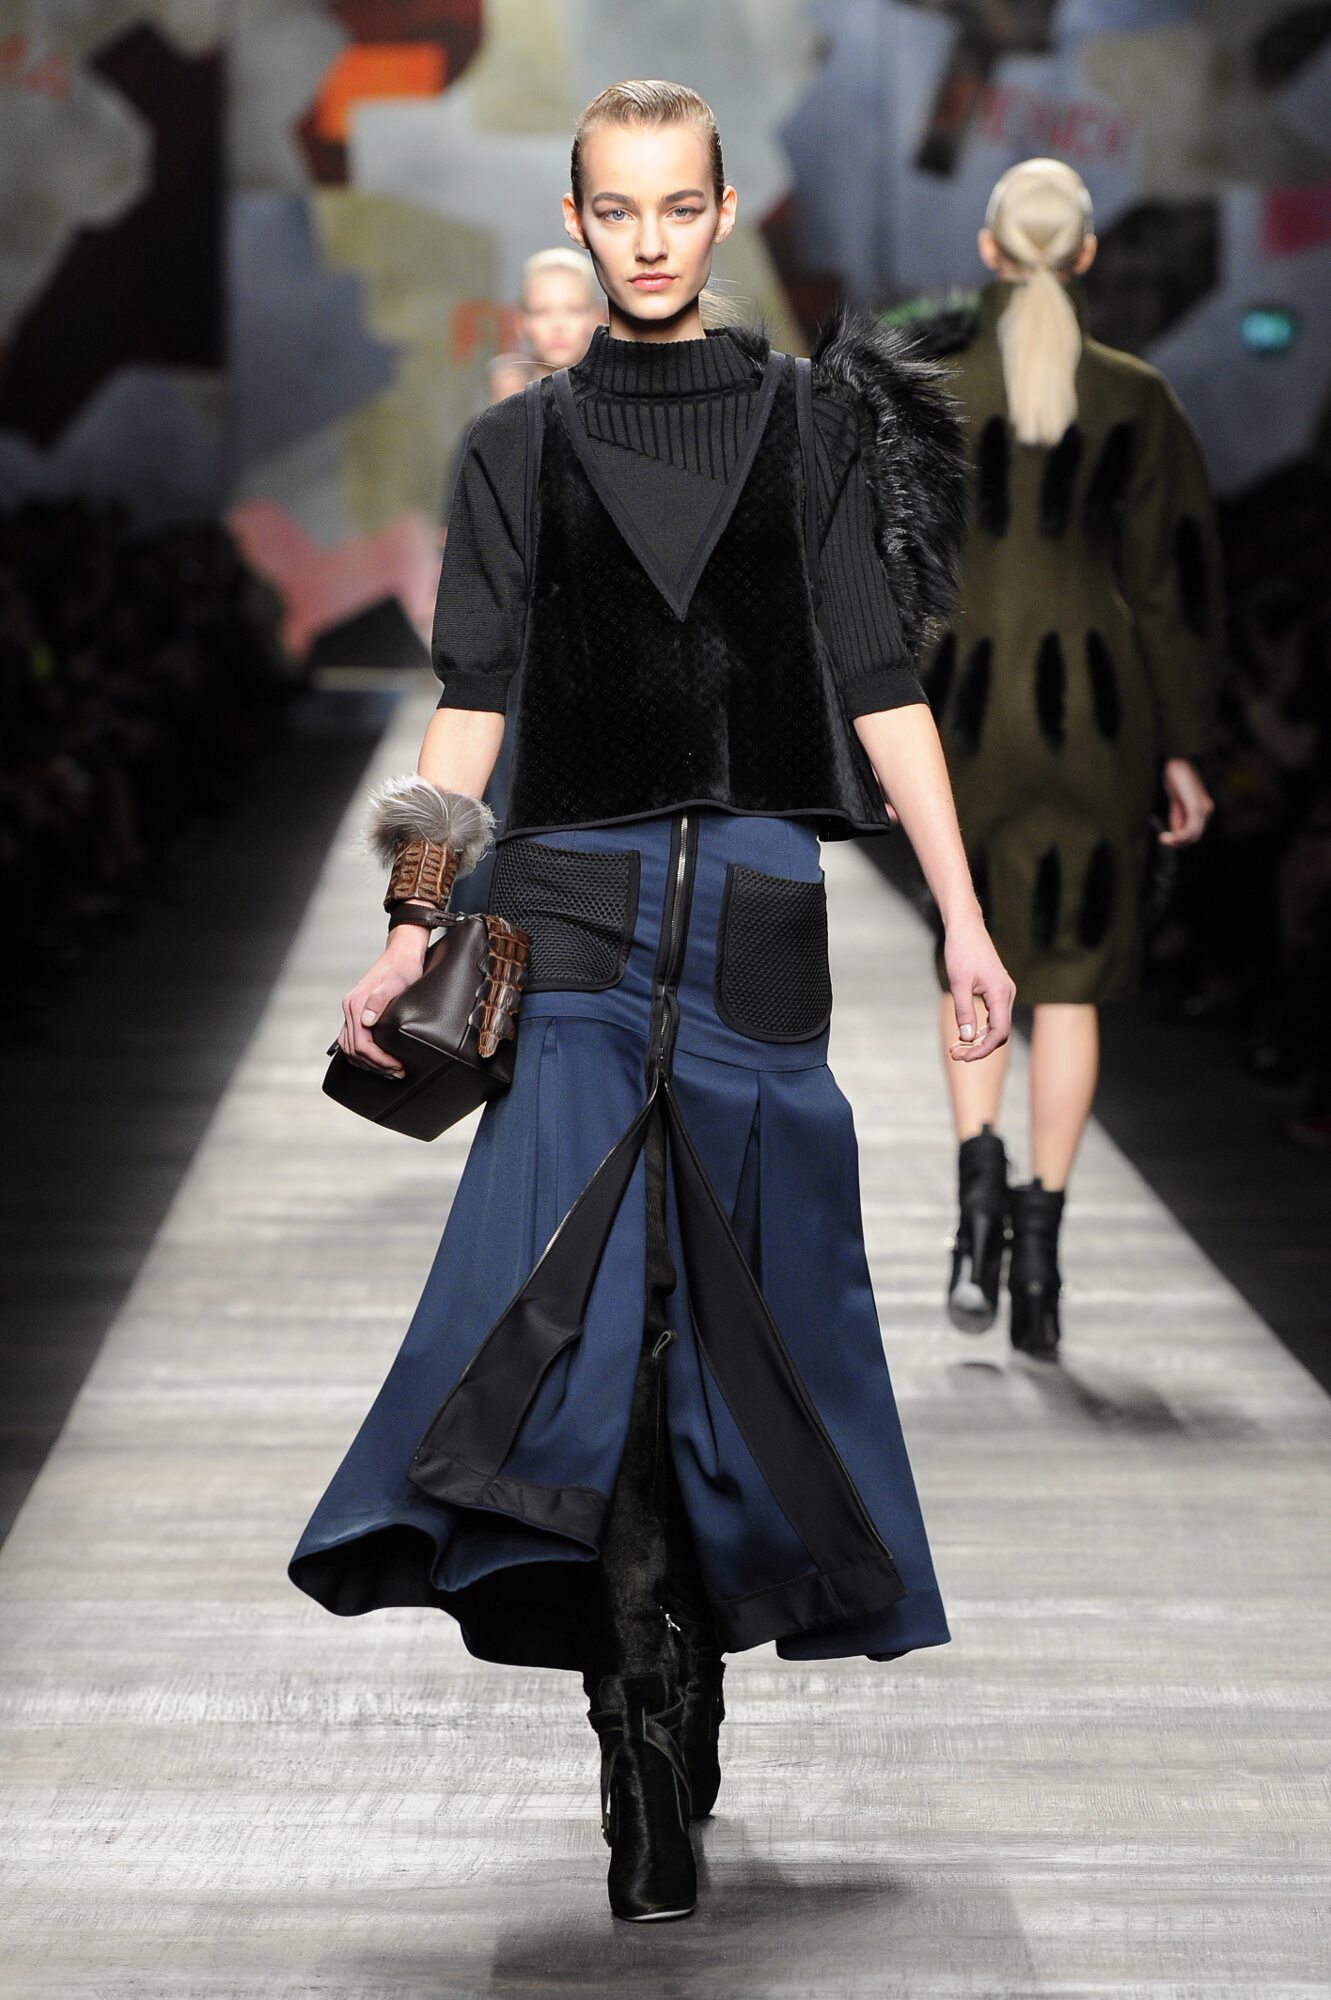 FENDI FALL WINTER 2014-15 WOMEN’S COLLECTION | The Skinny Beep